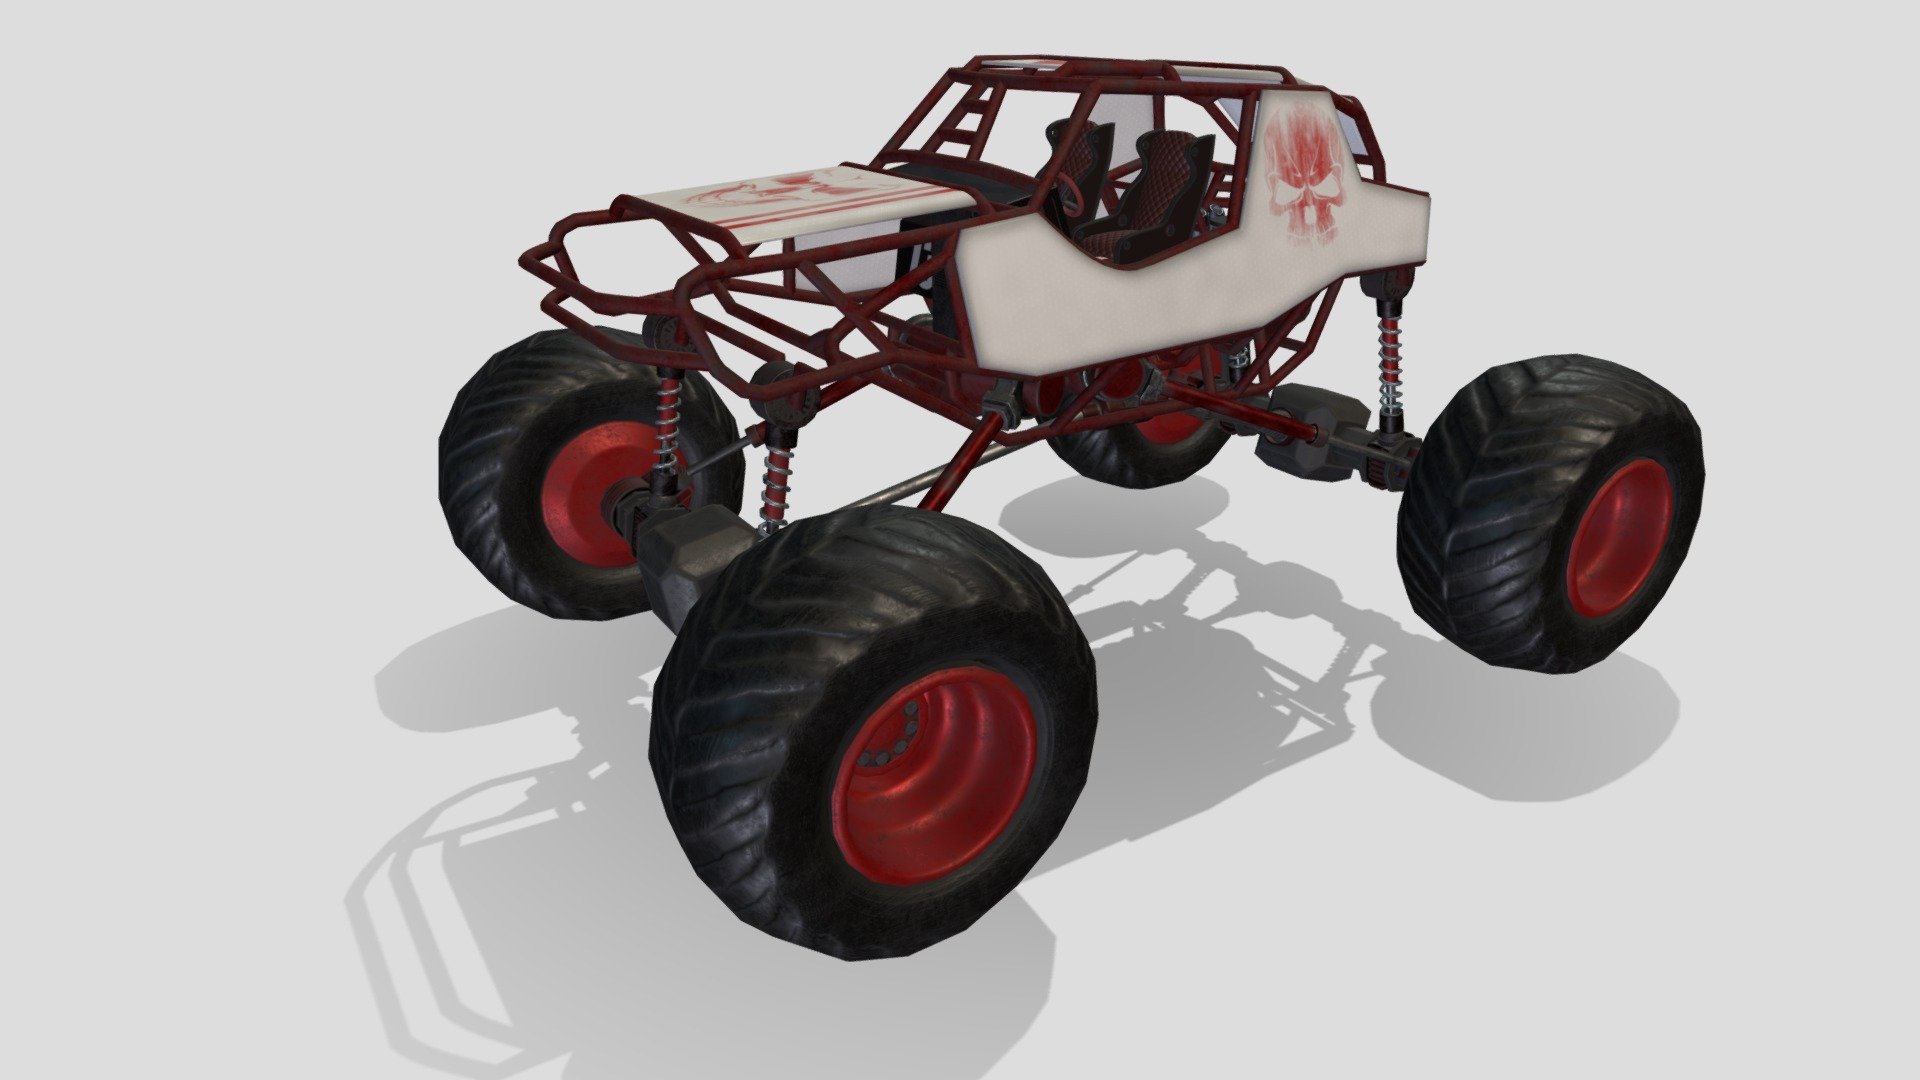 This is a 3d model of a monster truck.
polygons -15909
vertexes -16677
PBR texture 4096x4096
There are also classic textures - Red Monster Truck - 3D model by vitvitskyi 3d model